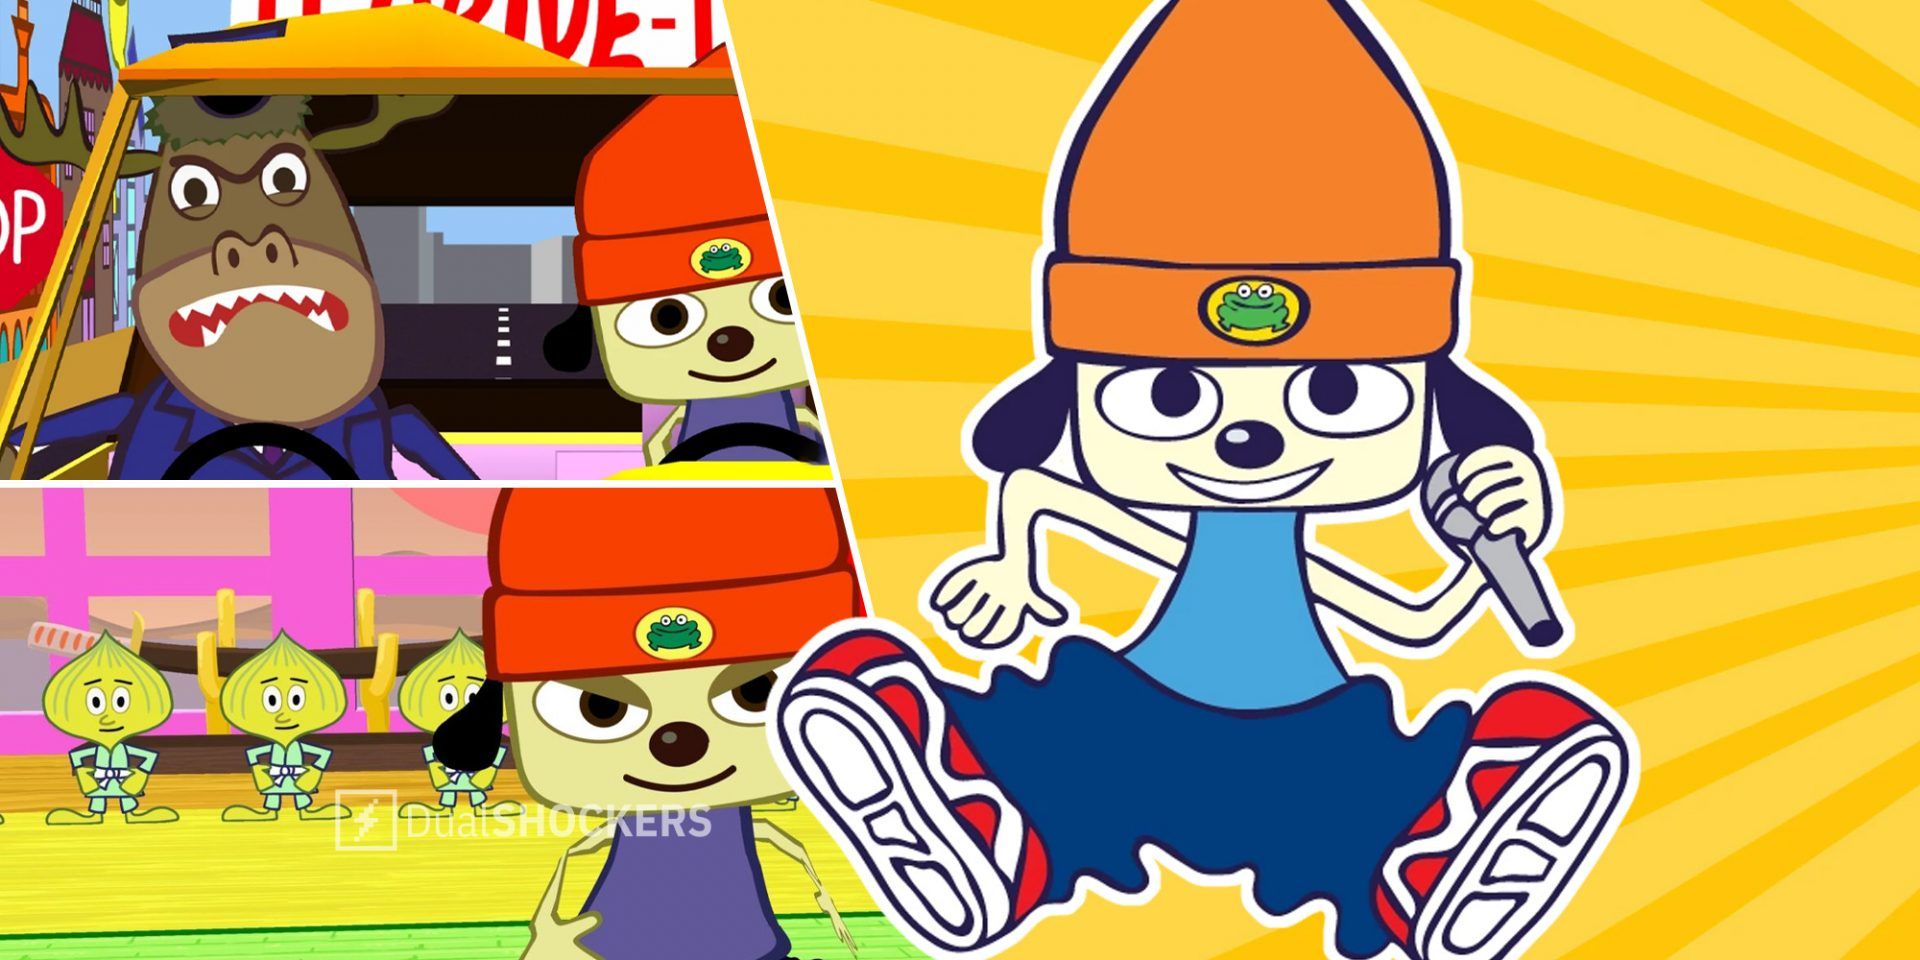 PaRappa the Rapper Remastered - Stage 2 - Cool rating 